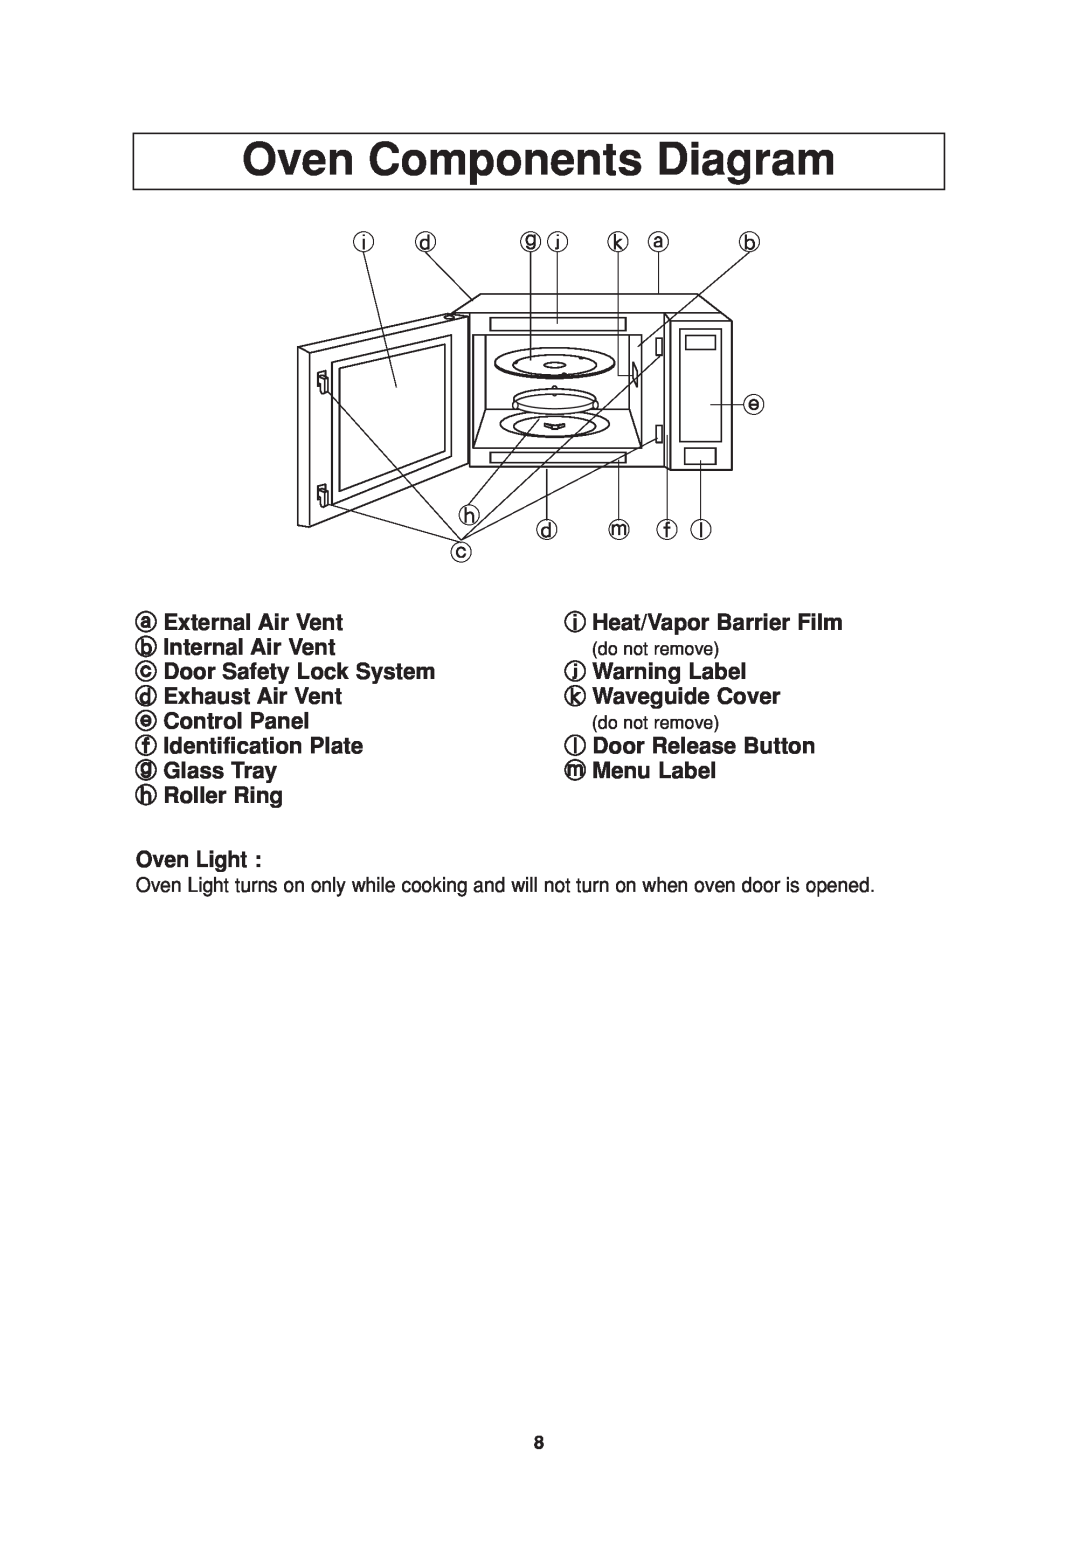 Panasonic NN-T664SF operating instructions Oven Components Diagram 